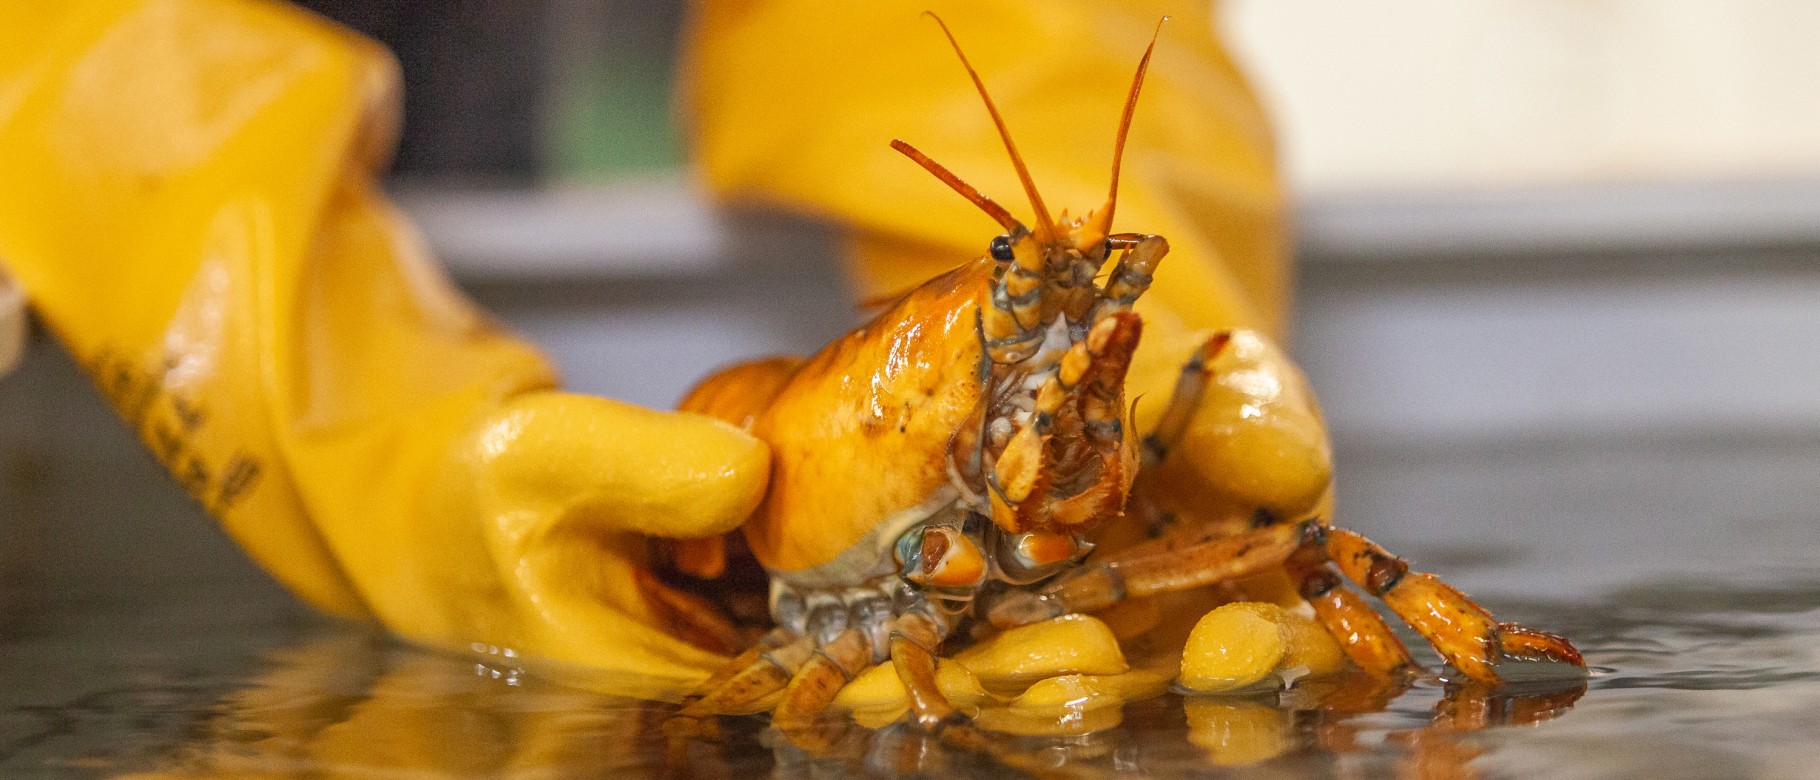 Banana the yellow lobster is being housed at the Marine Science Center